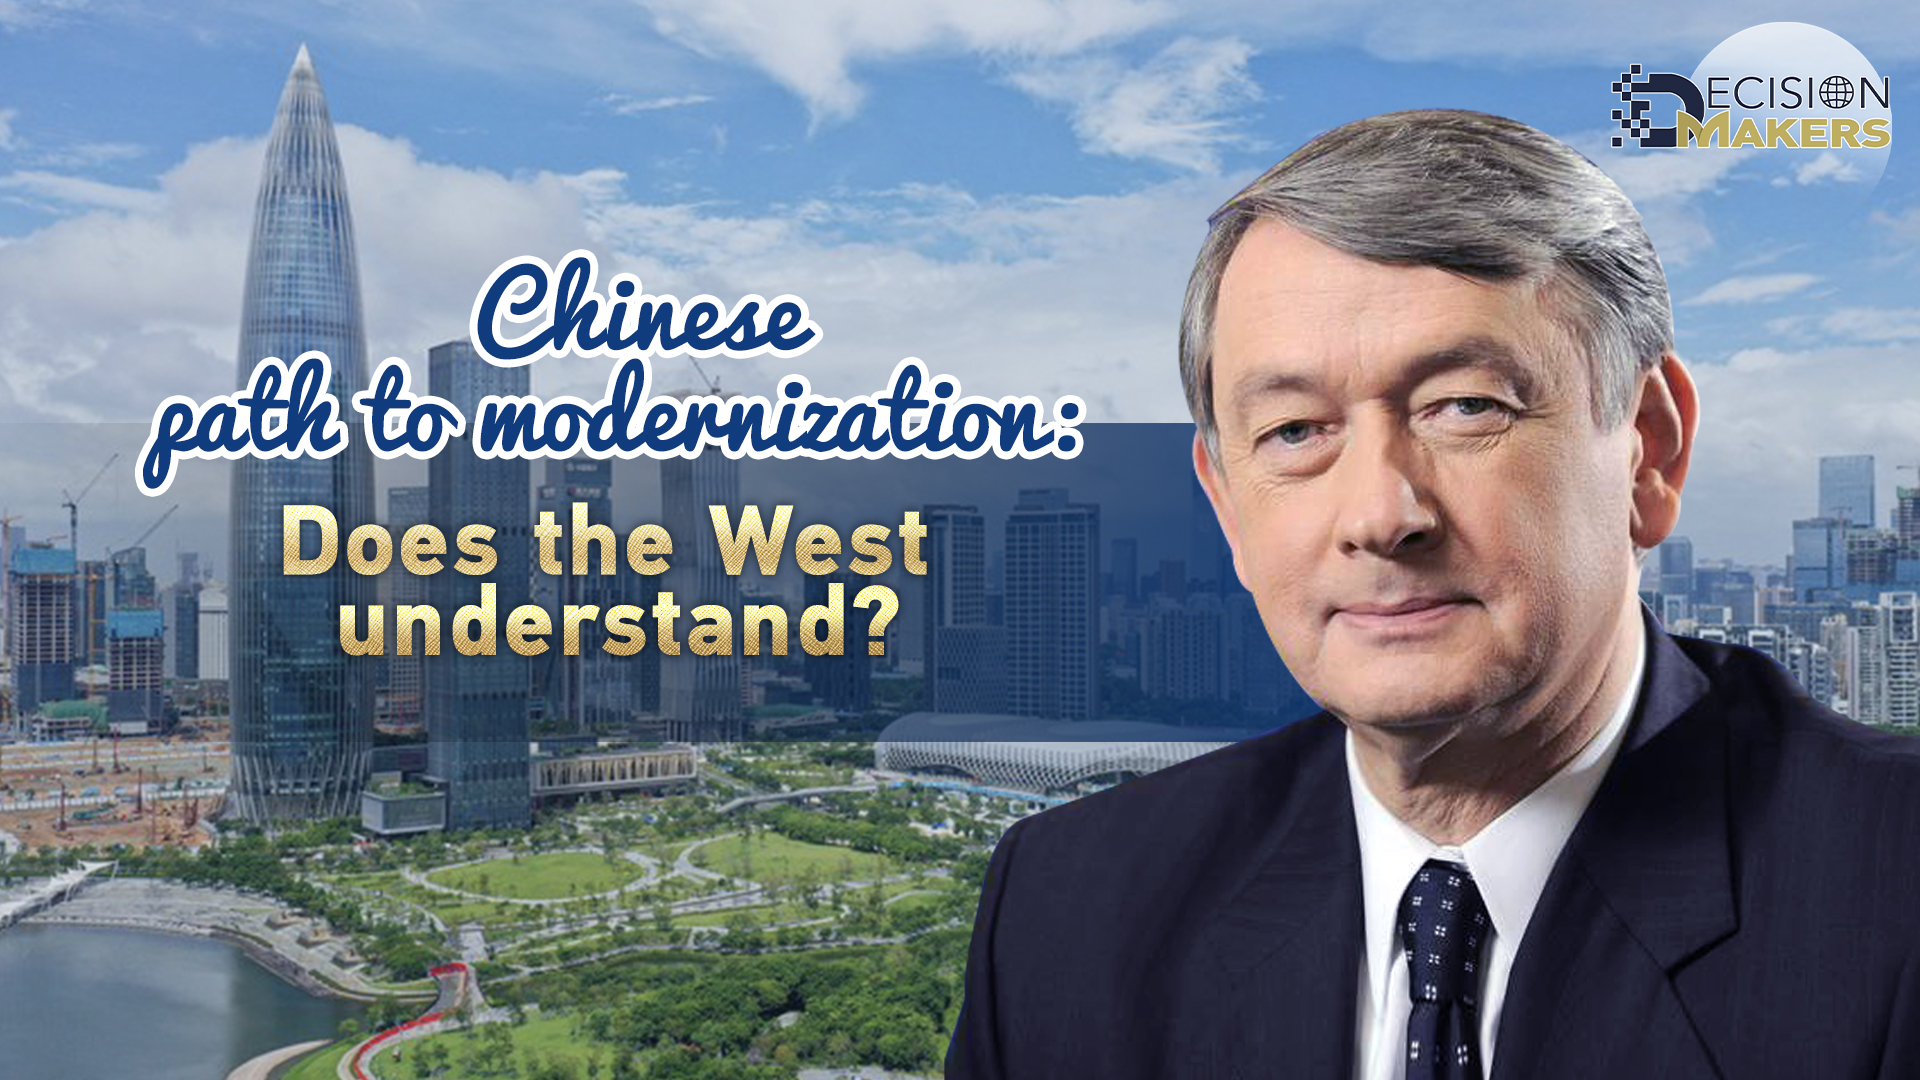 Chinese path to modernization: Does the West understand?